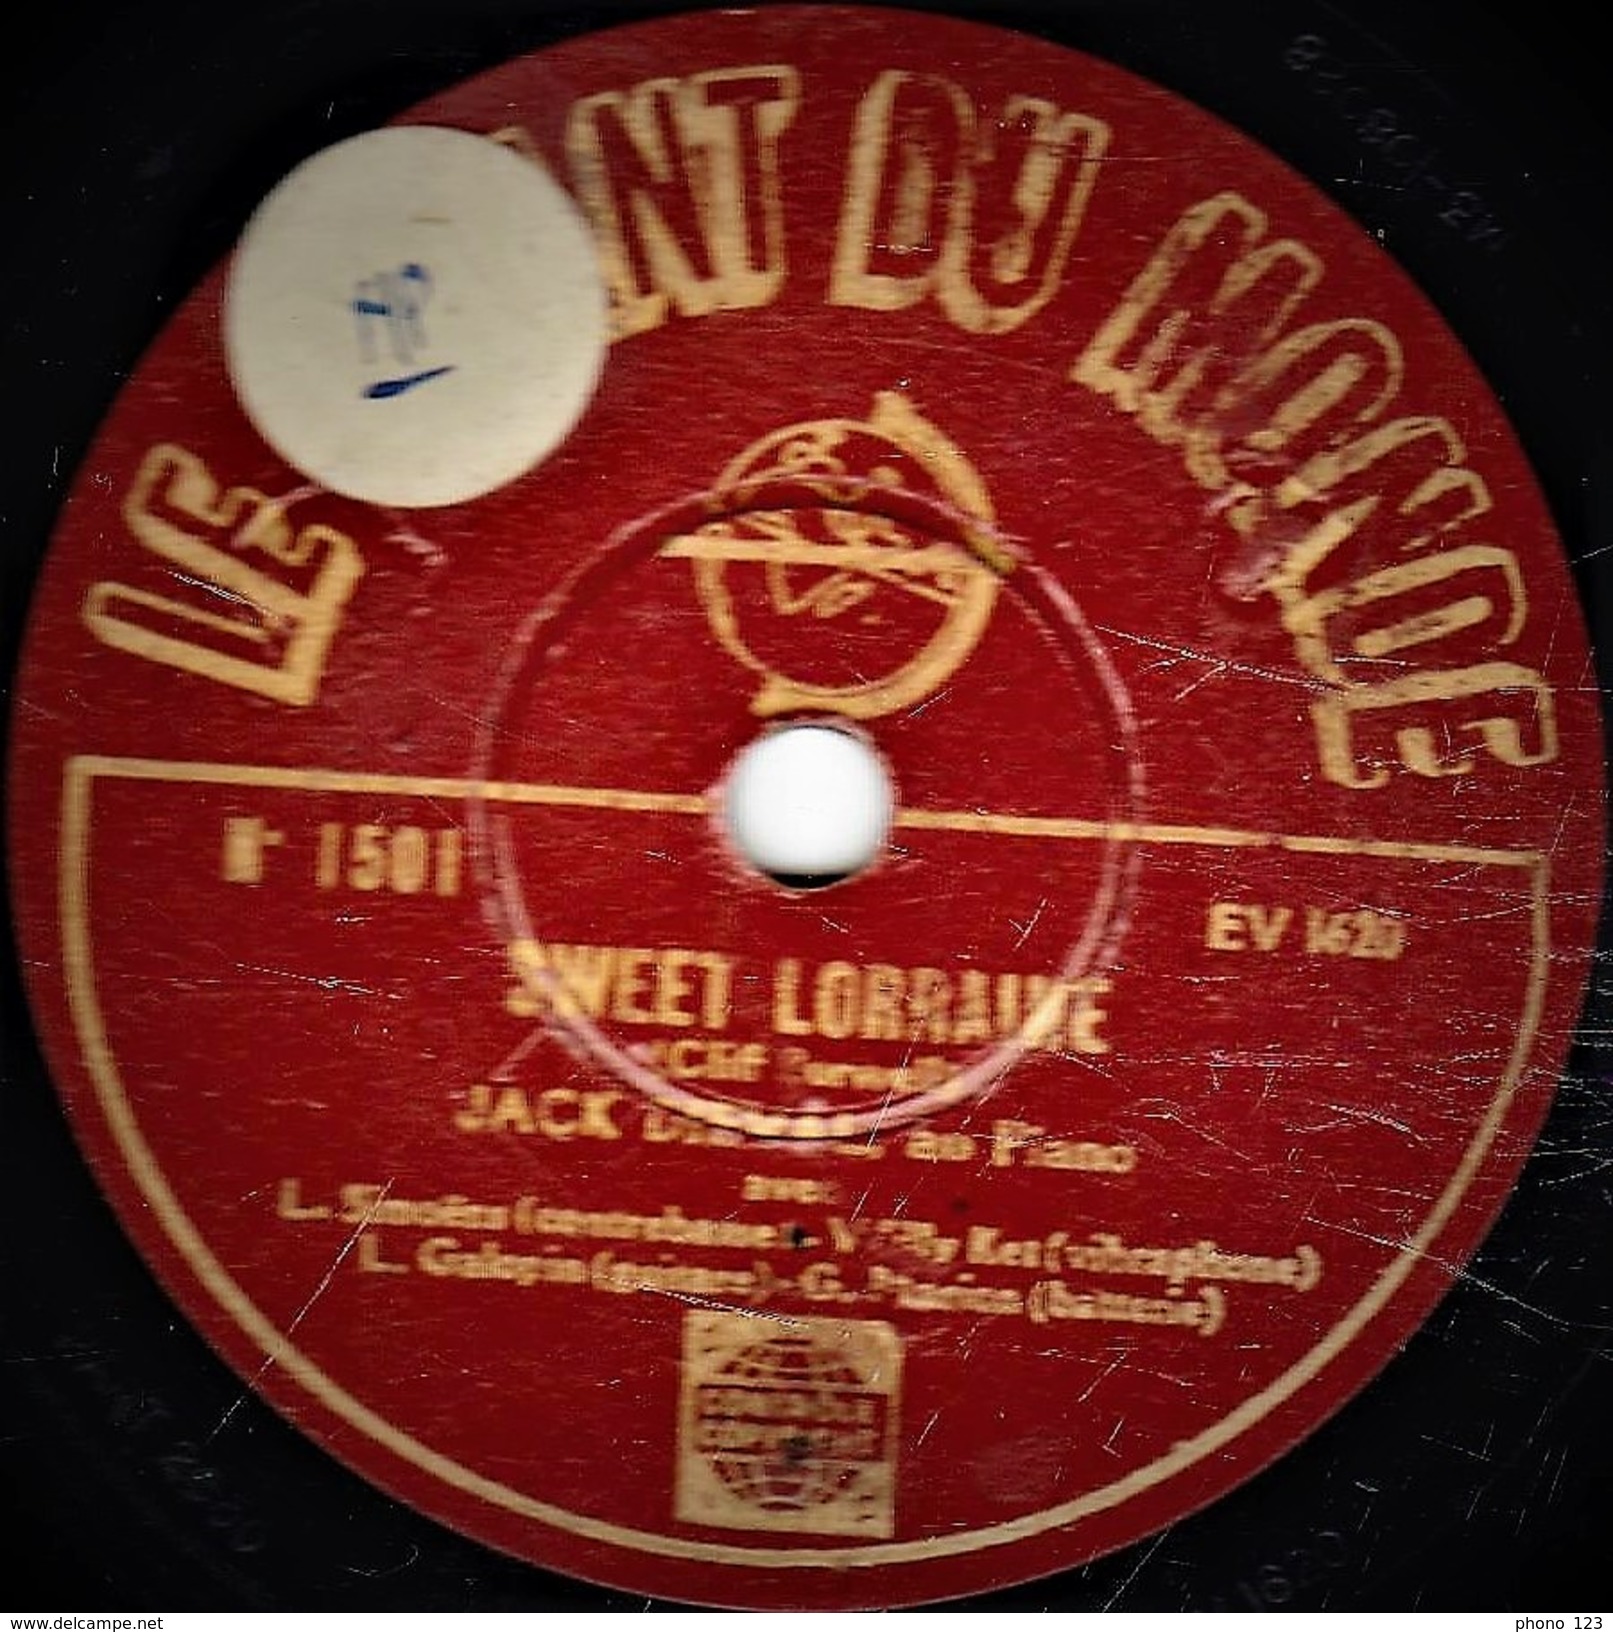 78 T - 25 Cm.  état B - JACK DIEVAL Piano - SHULLLIN In The HOLLYWOOD - SWEET LORRAINE - 78 T - Disques Pour Gramophone